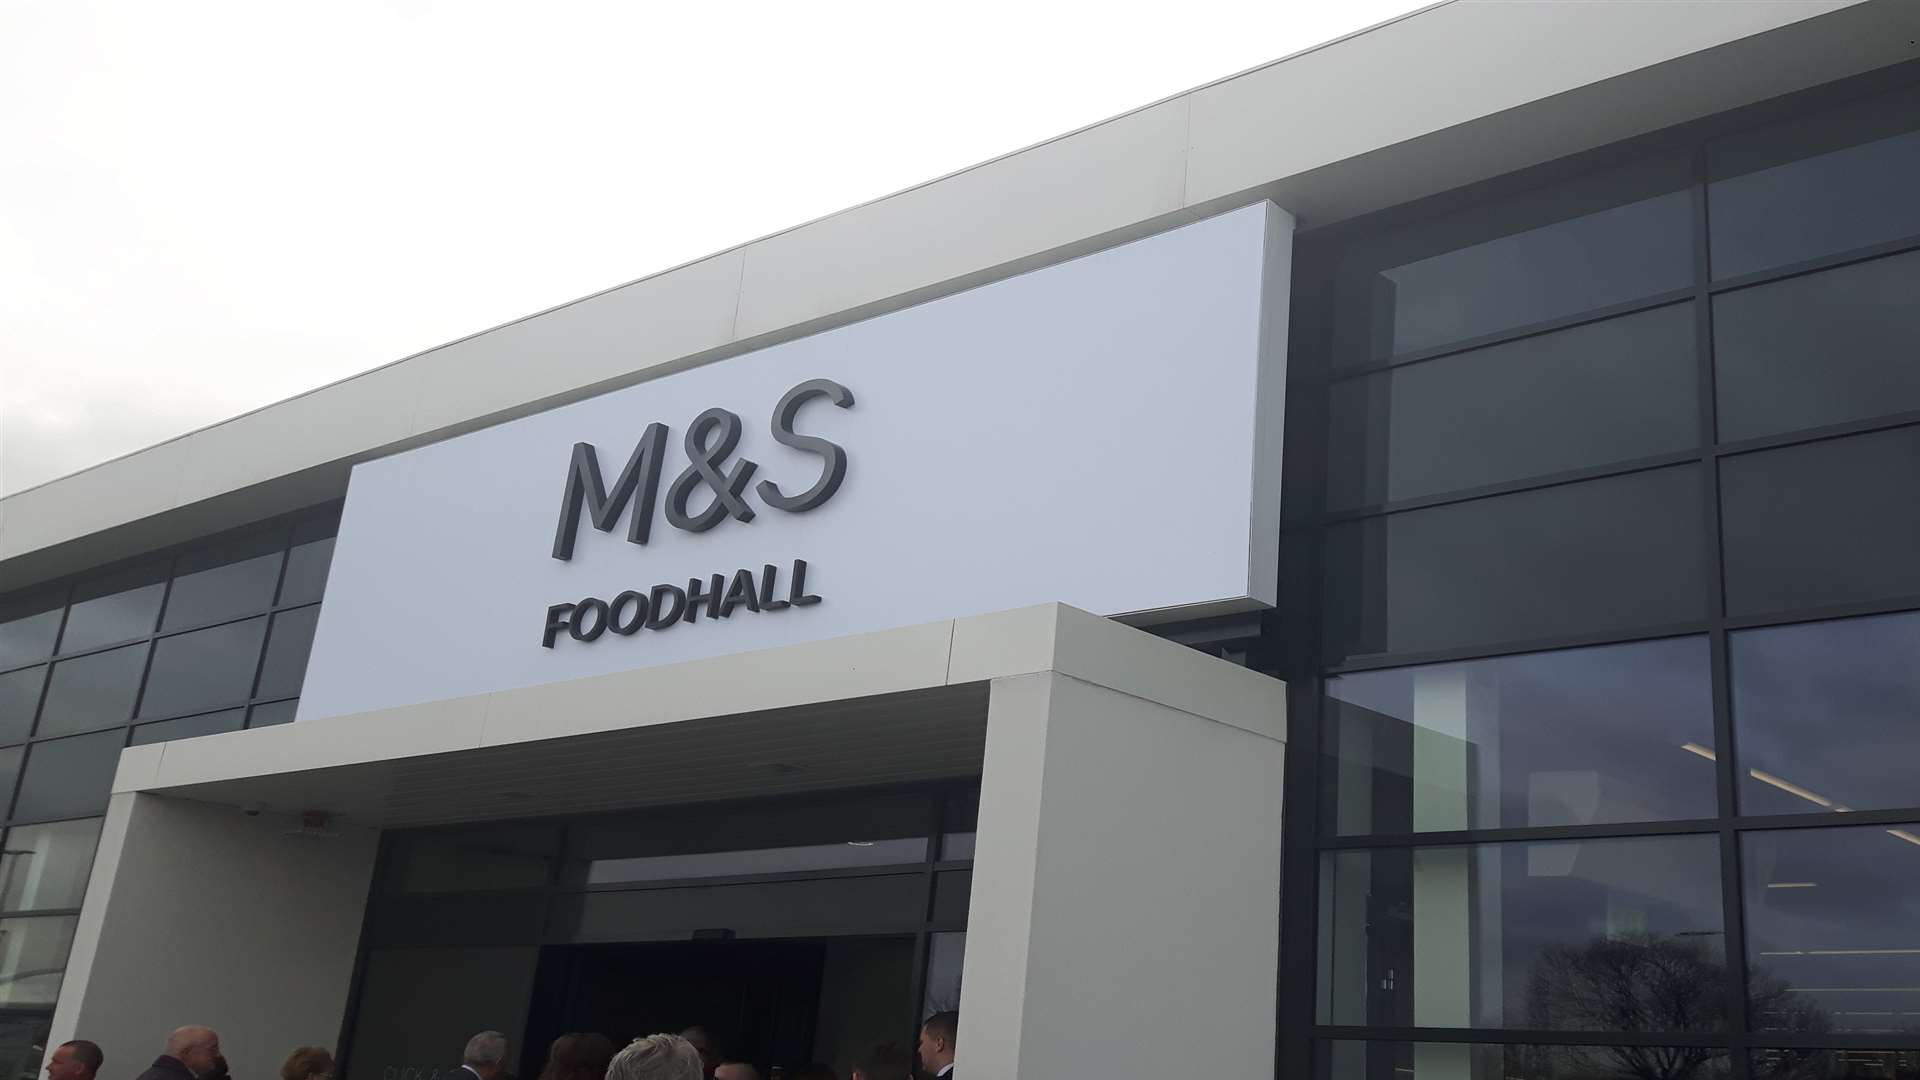 M&S opened today at 10am.